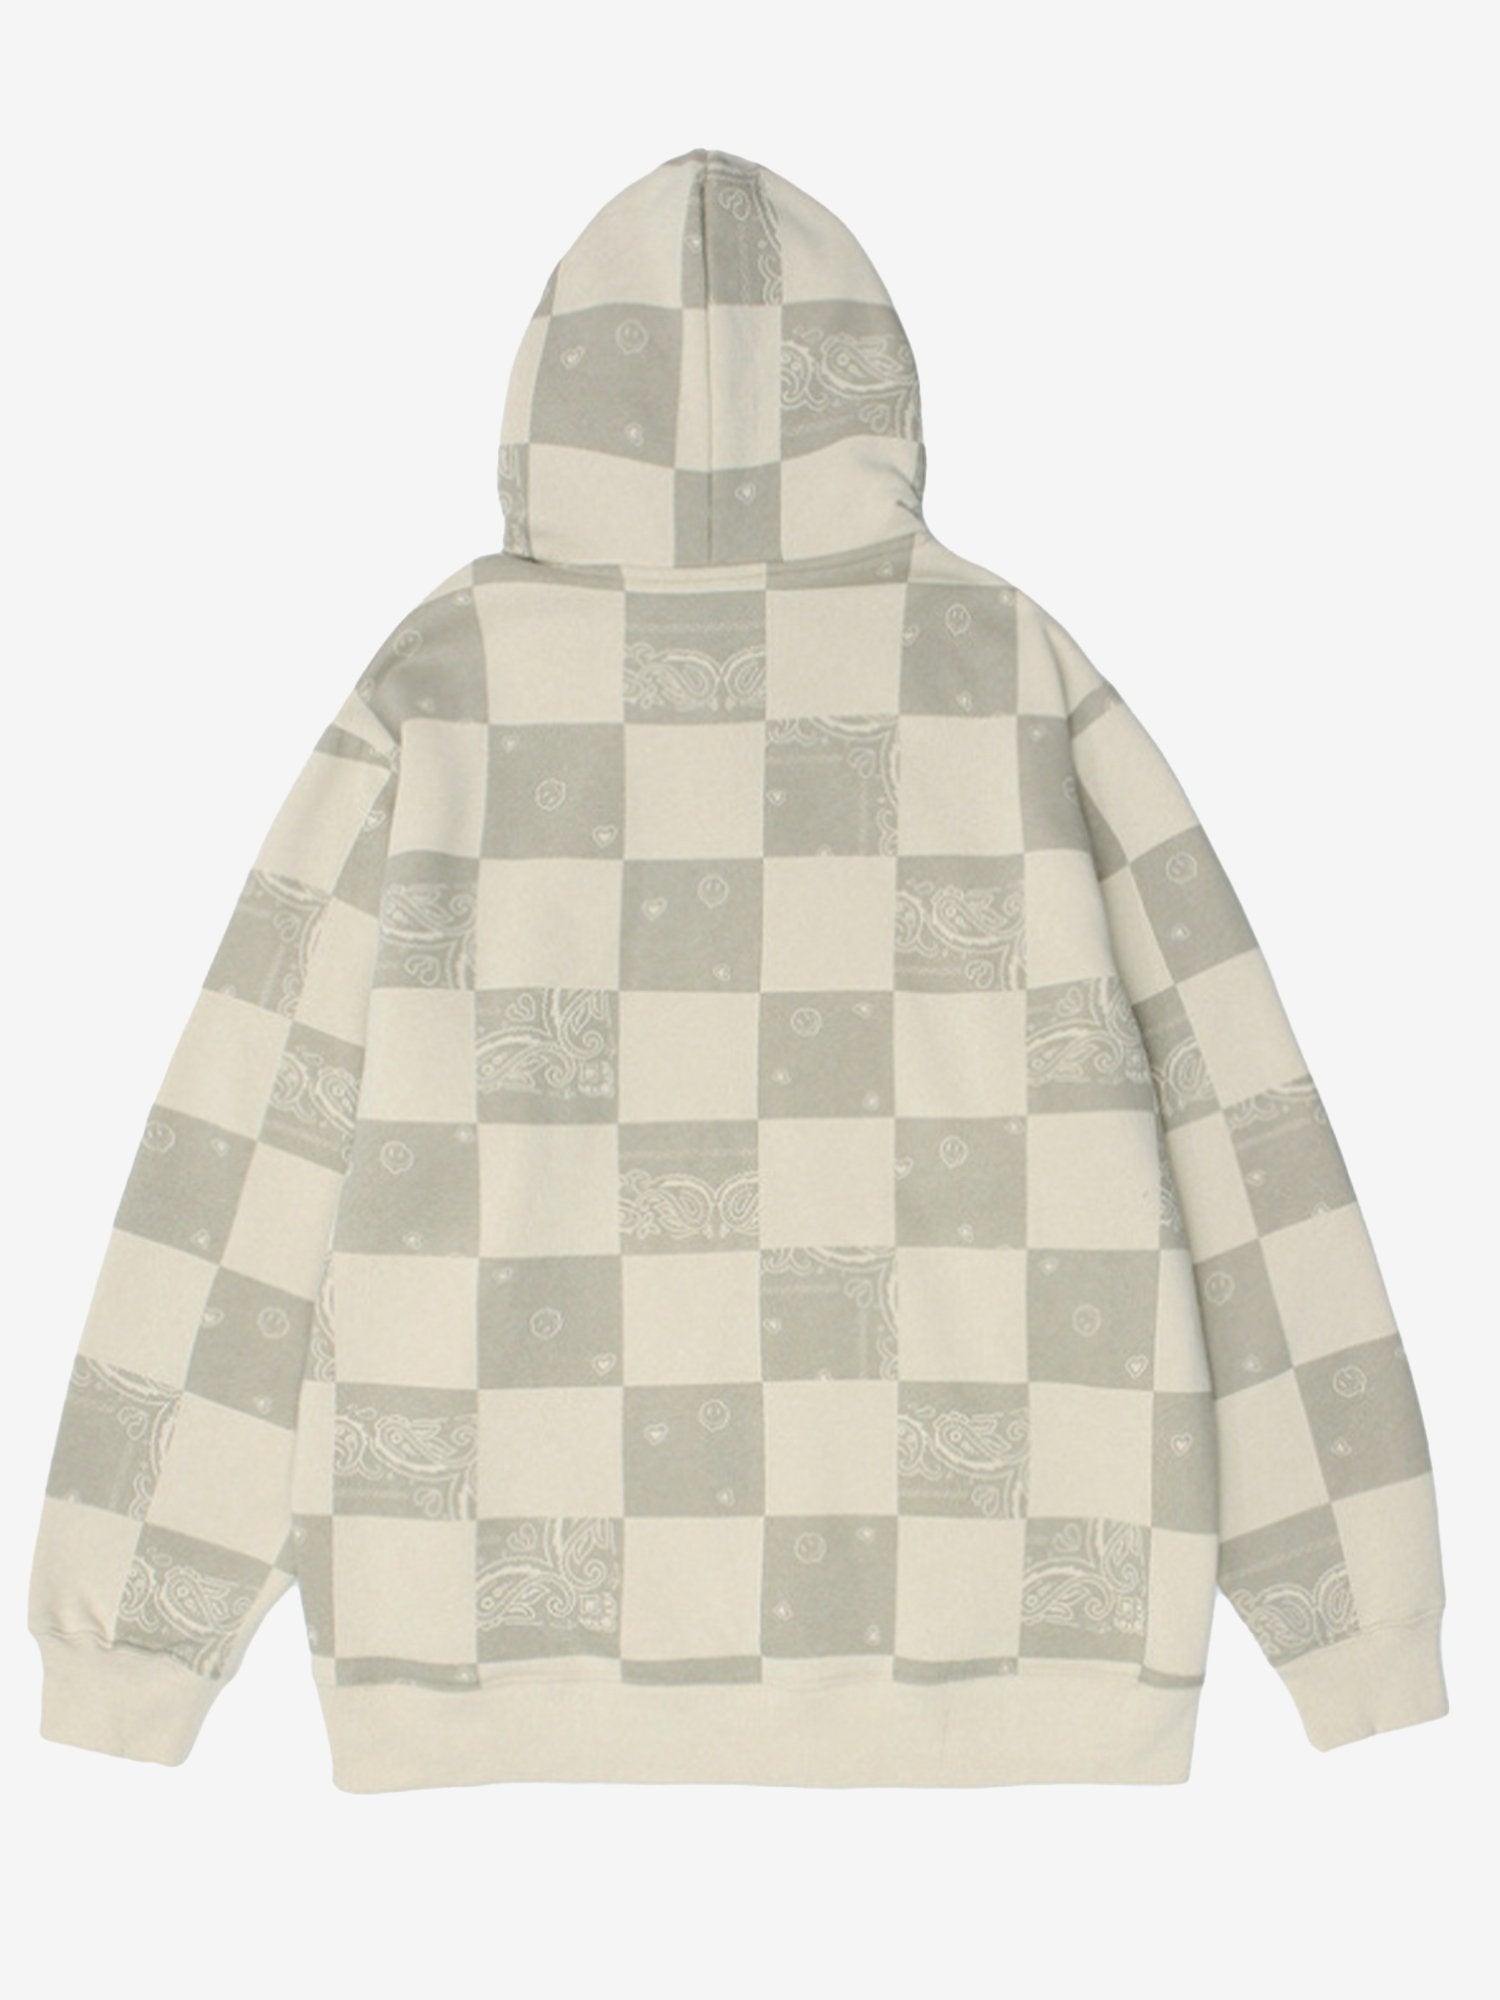 JUSTNOTAG Hiphop Plaid  Cotton Hooded Hoodies